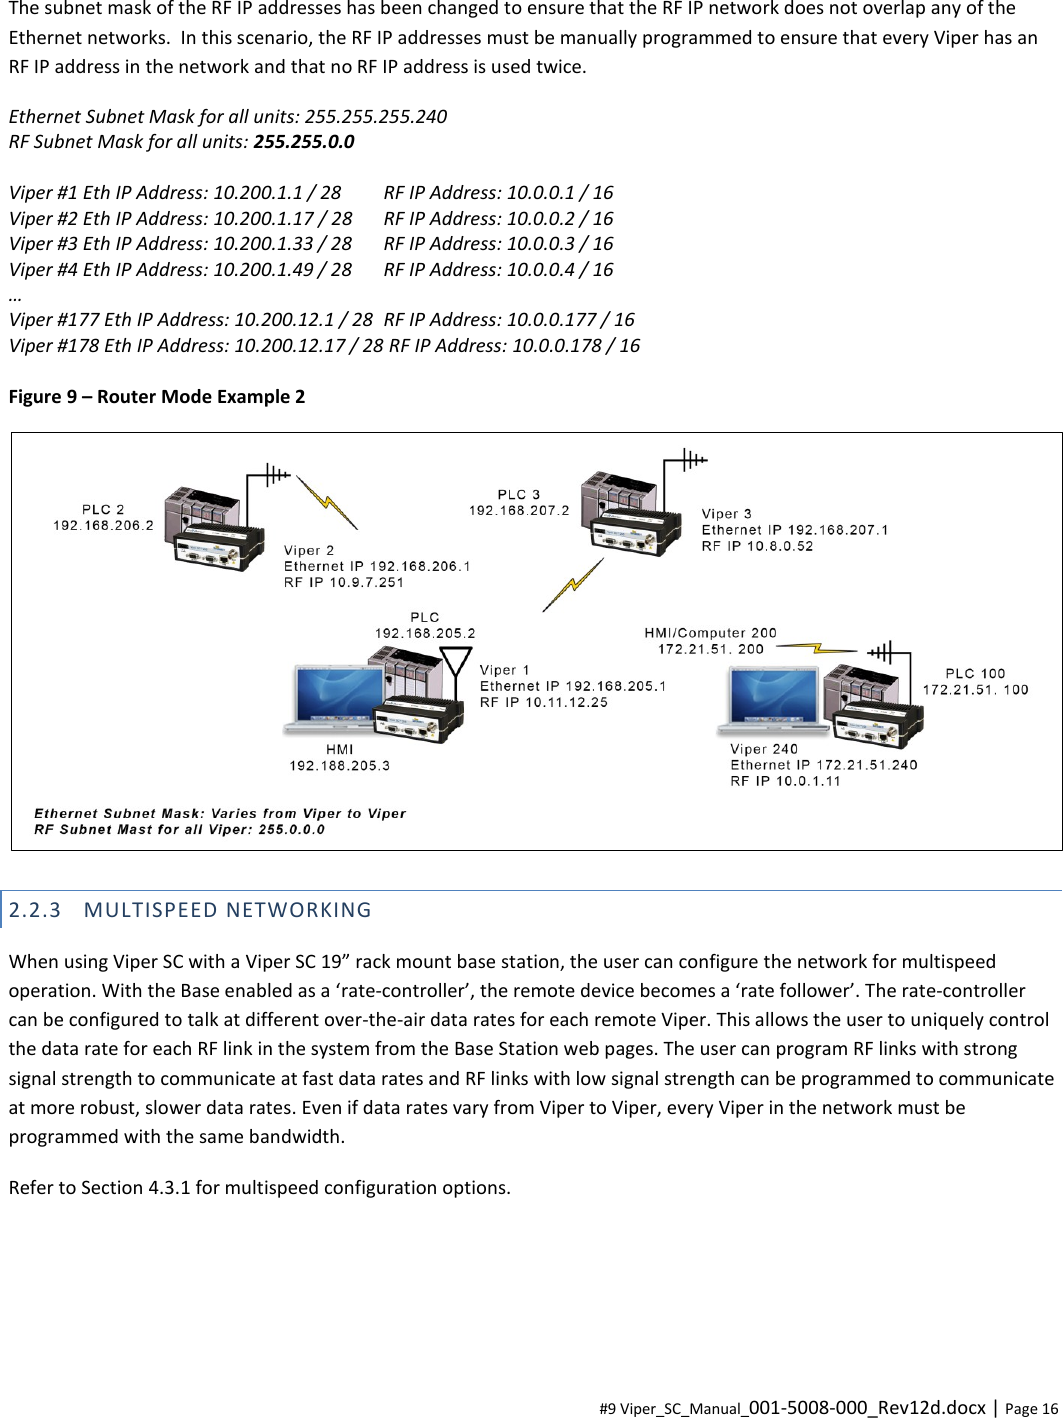  #9 Viper_SC_Manual_001-5008-000_Rev12d.docx | Page 16 The subnet mask of the RF IP addresses has been changed to ensure that the RF IP network does not overlap any of the Ethernet networks.  In this scenario, the RF IP addresses must be manually programmed to ensure that every Viper has an RF IP address in the network and that no RF IP address is used twice. Ethernet Subnet Mask for all units: 255.255.255.240 RF Subnet Mask for all units: 255.255.0.0  Viper #1 Eth IP Address: 10.200.1.1 / 28  RF IP Address: 10.0.0.1 / 16 Viper #2 Eth IP Address: 10.200.1.17 / 28  RF IP Address: 10.0.0.2 / 16 Viper #3 Eth IP Address: 10.200.1.33 / 28  RF IP Address: 10.0.0.3 / 16 Viper #4 Eth IP Address: 10.200.1.49 / 28  RF IP Address: 10.0.0.4 / 16 … Viper #177 Eth IP Address: 10.200.12.1 / 28  RF IP Address: 10.0.0.177 / 16 Viper #178 Eth IP Address: 10.200.12.17 / 28 RF IP Address: 10.0.0.178 / 16  Figure 9 – Router Mode Example 2  2.2.3 MULTISPEED NETWORKING When using Viper SC with a Viper SC 19” rack mount base station, the user can configure the network for multispeed operation. With the Base enabled as a ‘rate-controller’, the remote device becomes a ‘rate follower’. The rate-controller can be configured to talk at different over-the-air data rates for each remote Viper. This allows the user to uniquely control the data rate for each RF link in the system from the Base Station web pages. The user can program RF links with strong signal strength to communicate at fast data rates and RF links with low signal strength can be programmed to communicate at more robust, slower data rates. Even if data rates vary from Viper to Viper, every Viper in the network must be programmed with the same bandwidth.  Refer to Section 4.3.1 for multispeed configuration options.     